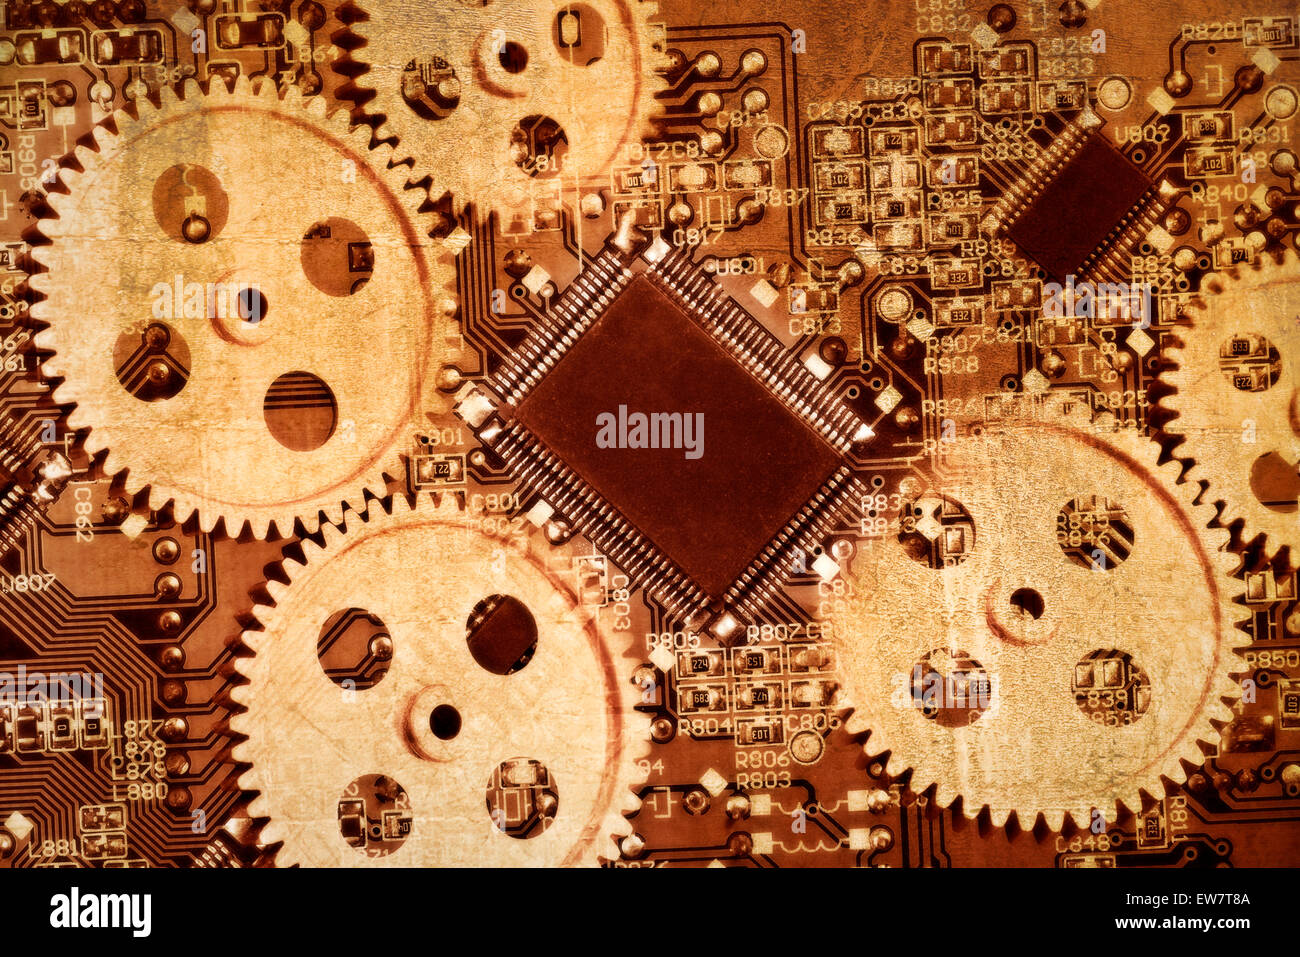 Gears and a circuit board with processor (CPU) of a computer symbolizing mechanic and digital technology. Stock Photo